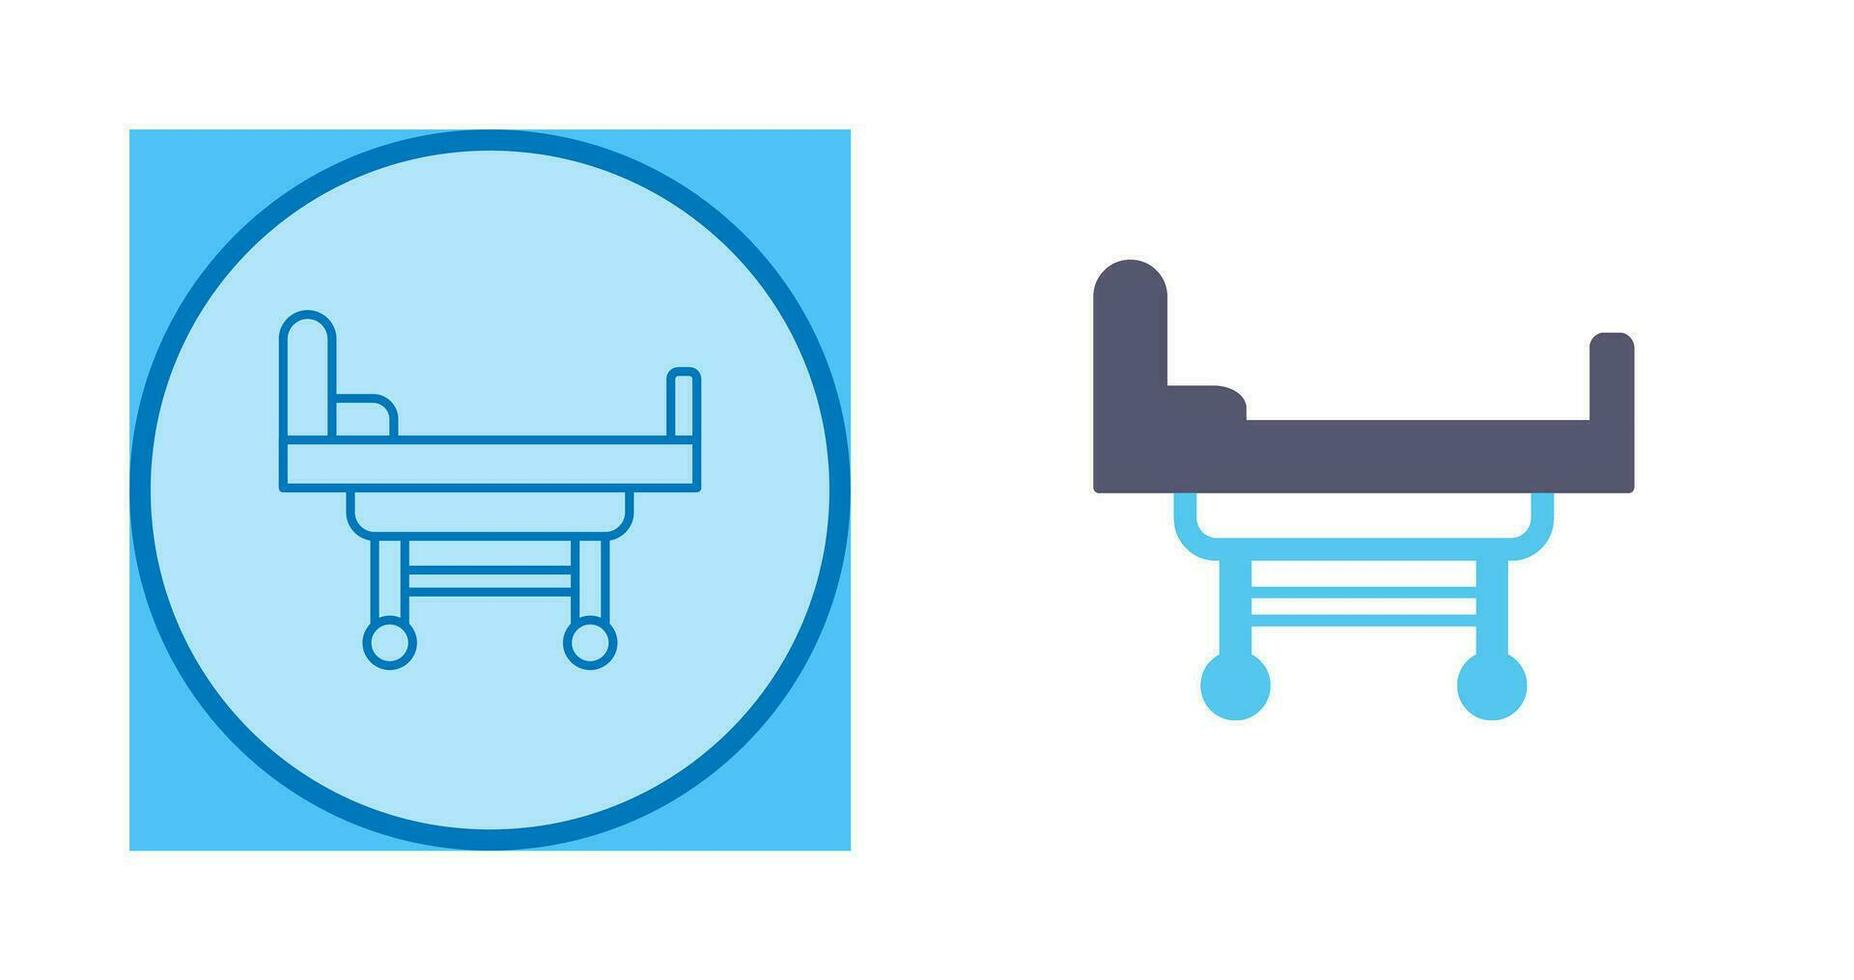 Hospital Bed Vector Icon